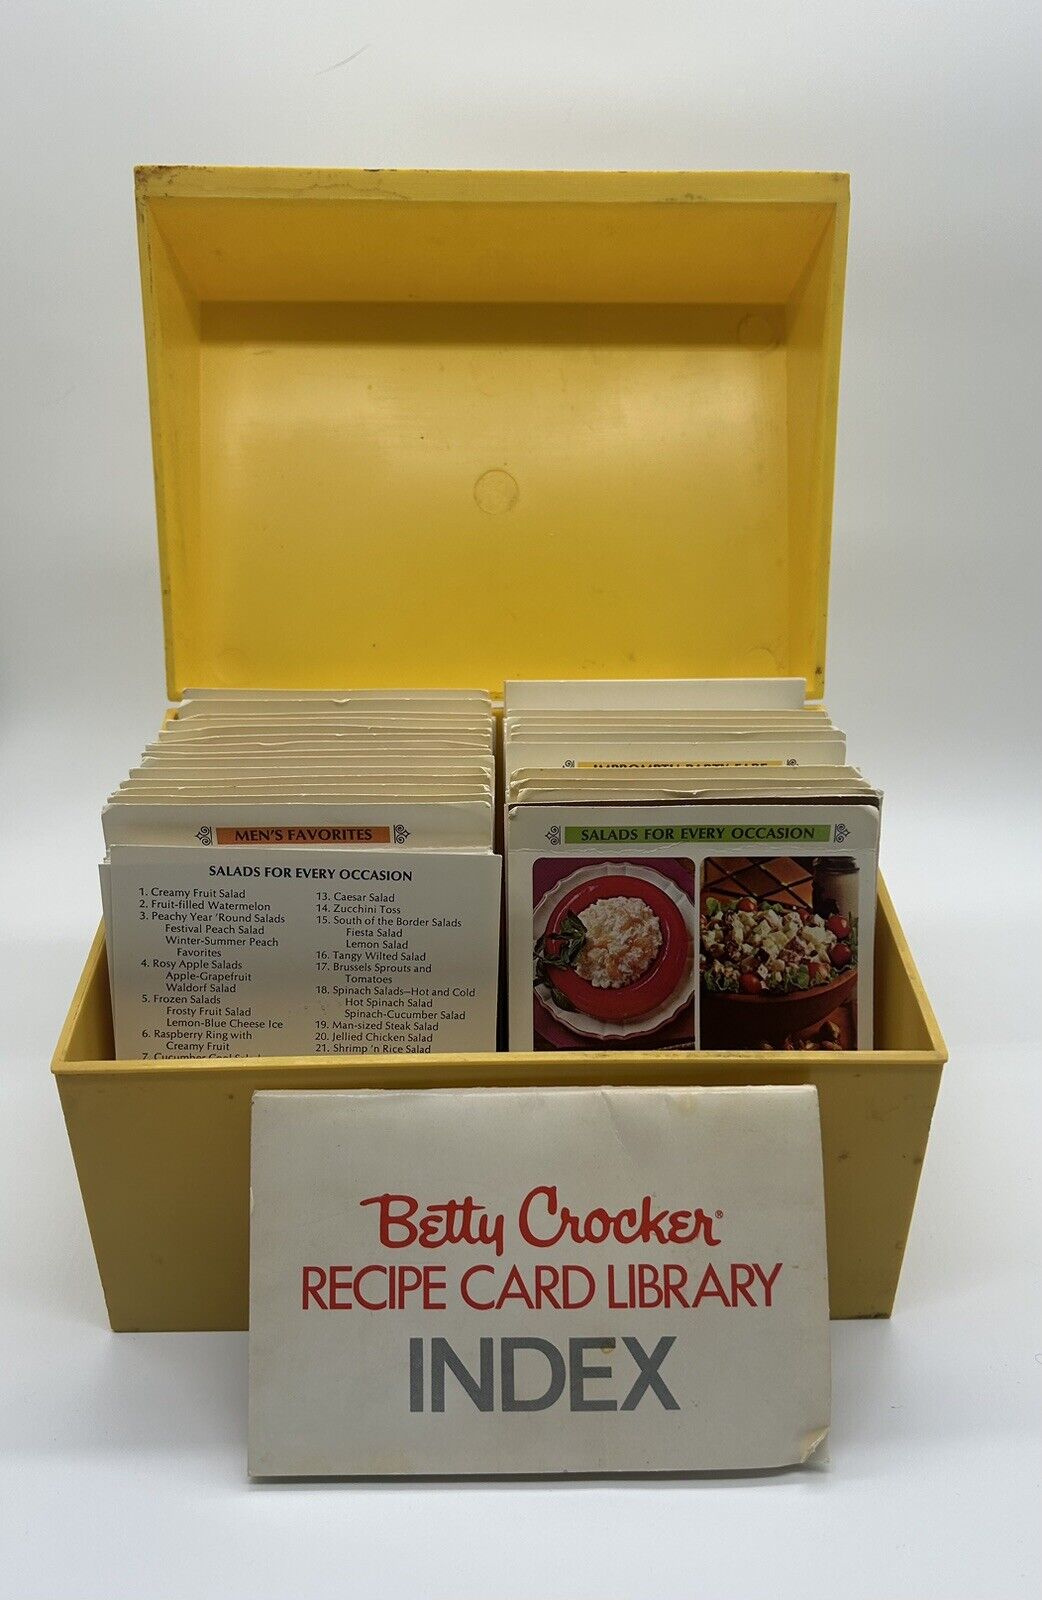 Vintage 1971 Betty Crocker Recipe Card Library Yellow Box w/ Card Index Complete